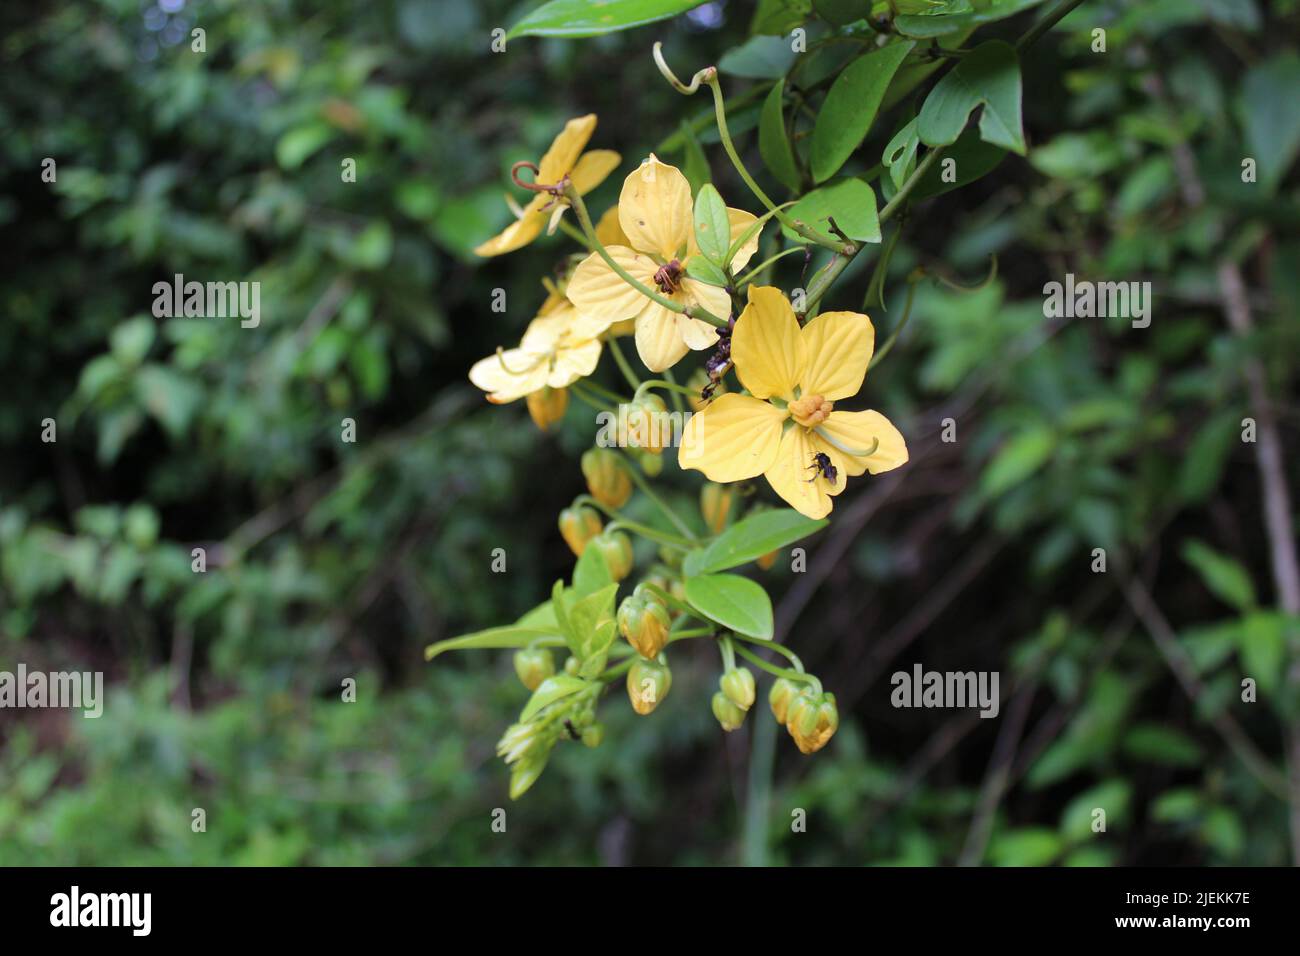 the yellow five petal flowers of The Christmas Tree (Senna hayesiana) growing in the jungle of Central America Stock Photo